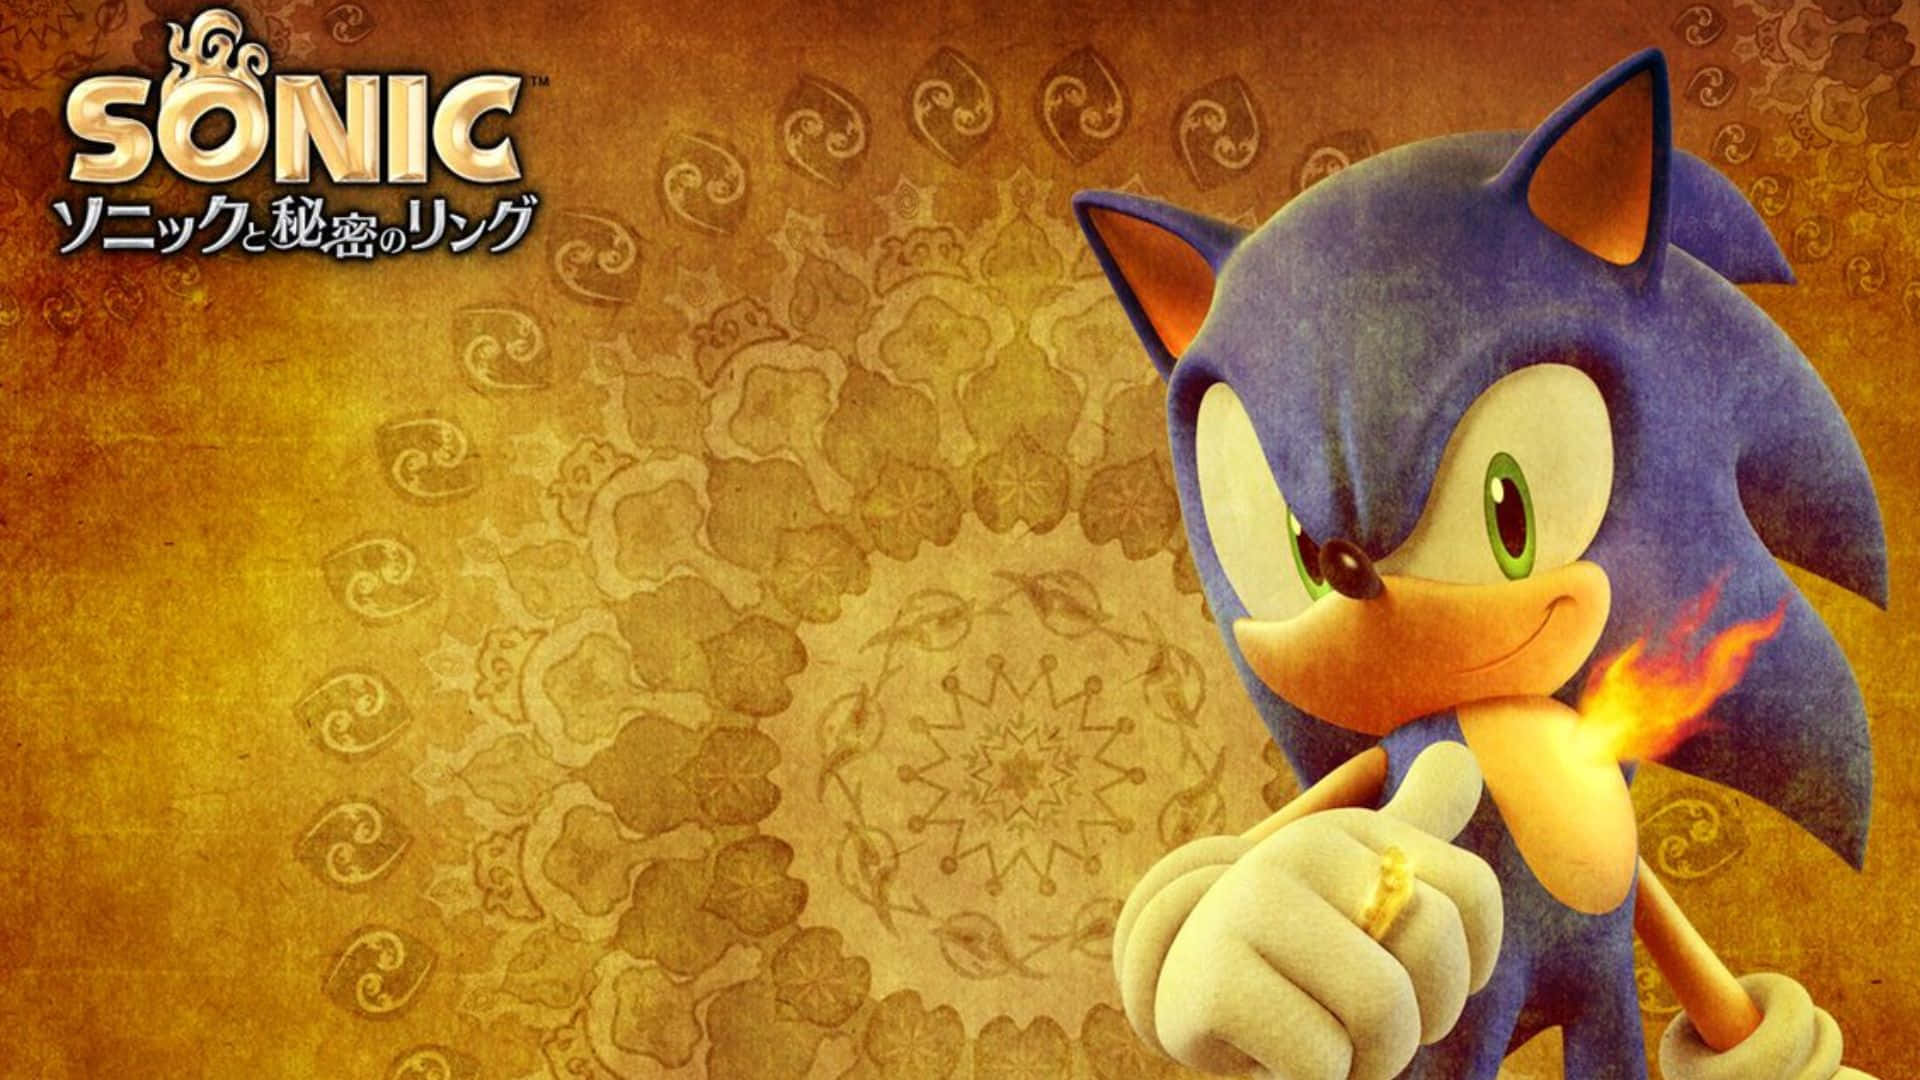 Sonic running through a vivid Arabian Nights-inspired world in Sonic and the Secret Rings Wallpaper